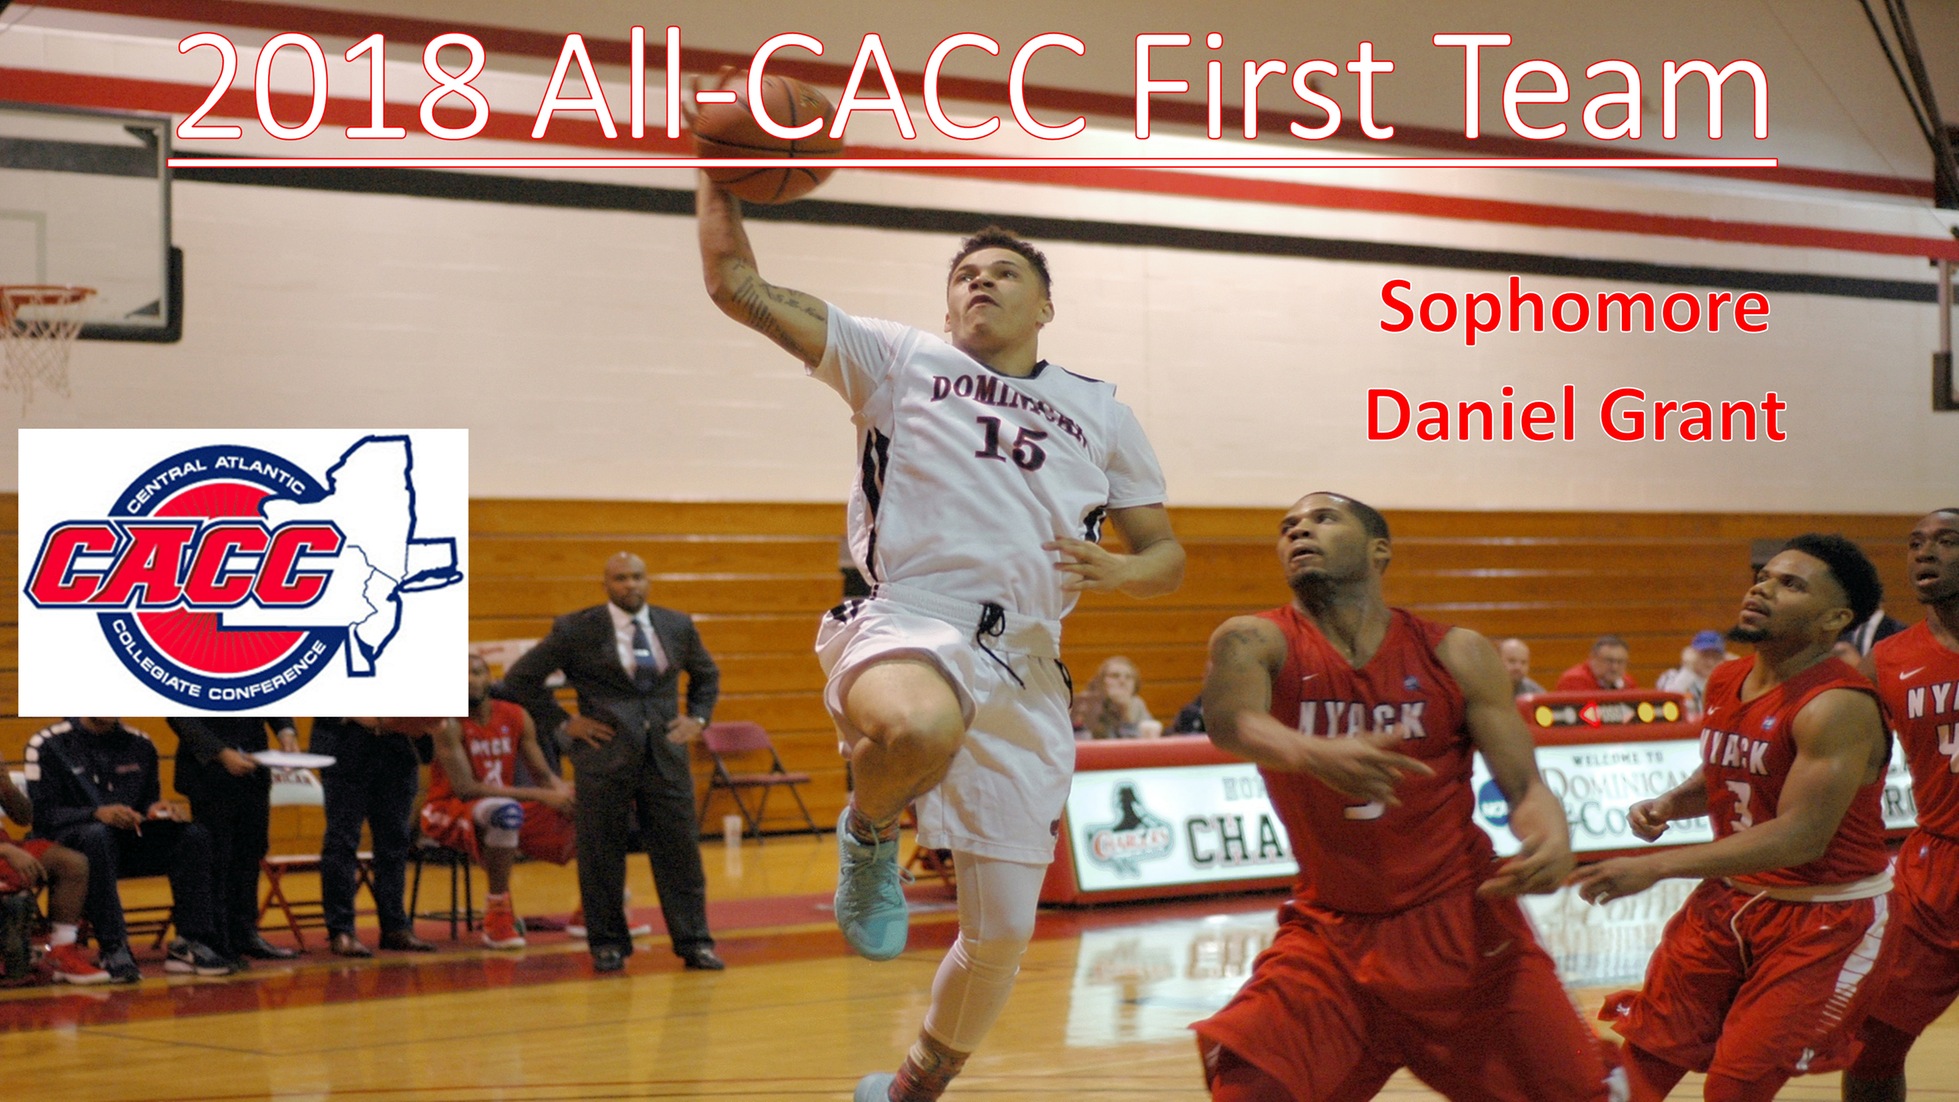 GRANT NAMED TO ALL-CACC MEN'S BASKETBALL FIRST TEAM